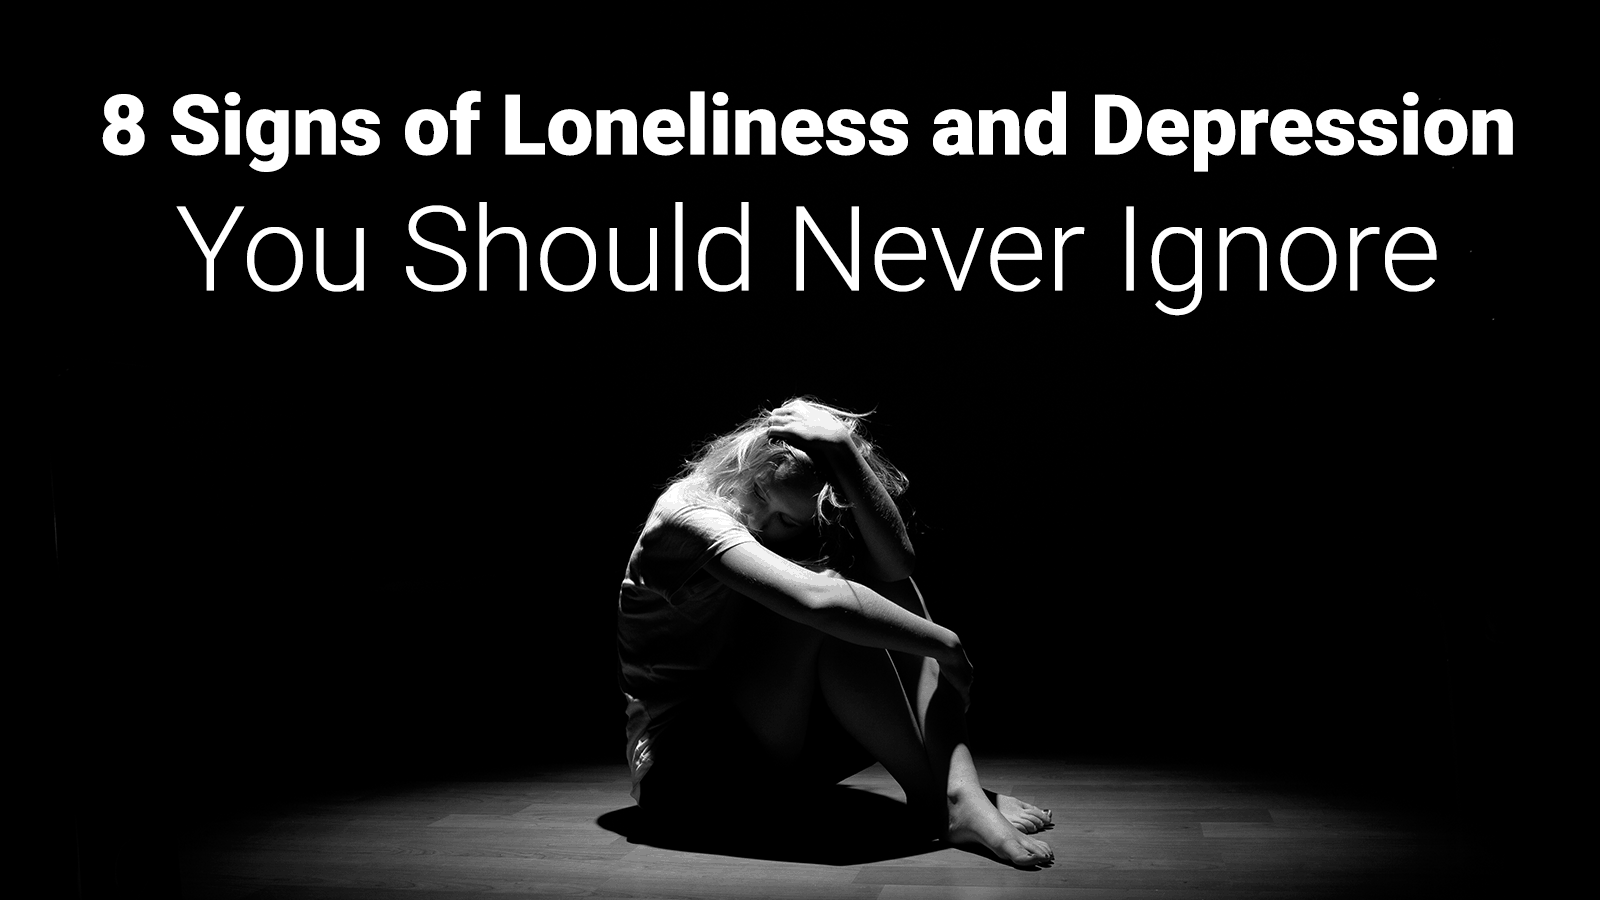 Signs Of Loneliness And Depression To Never Ignore 